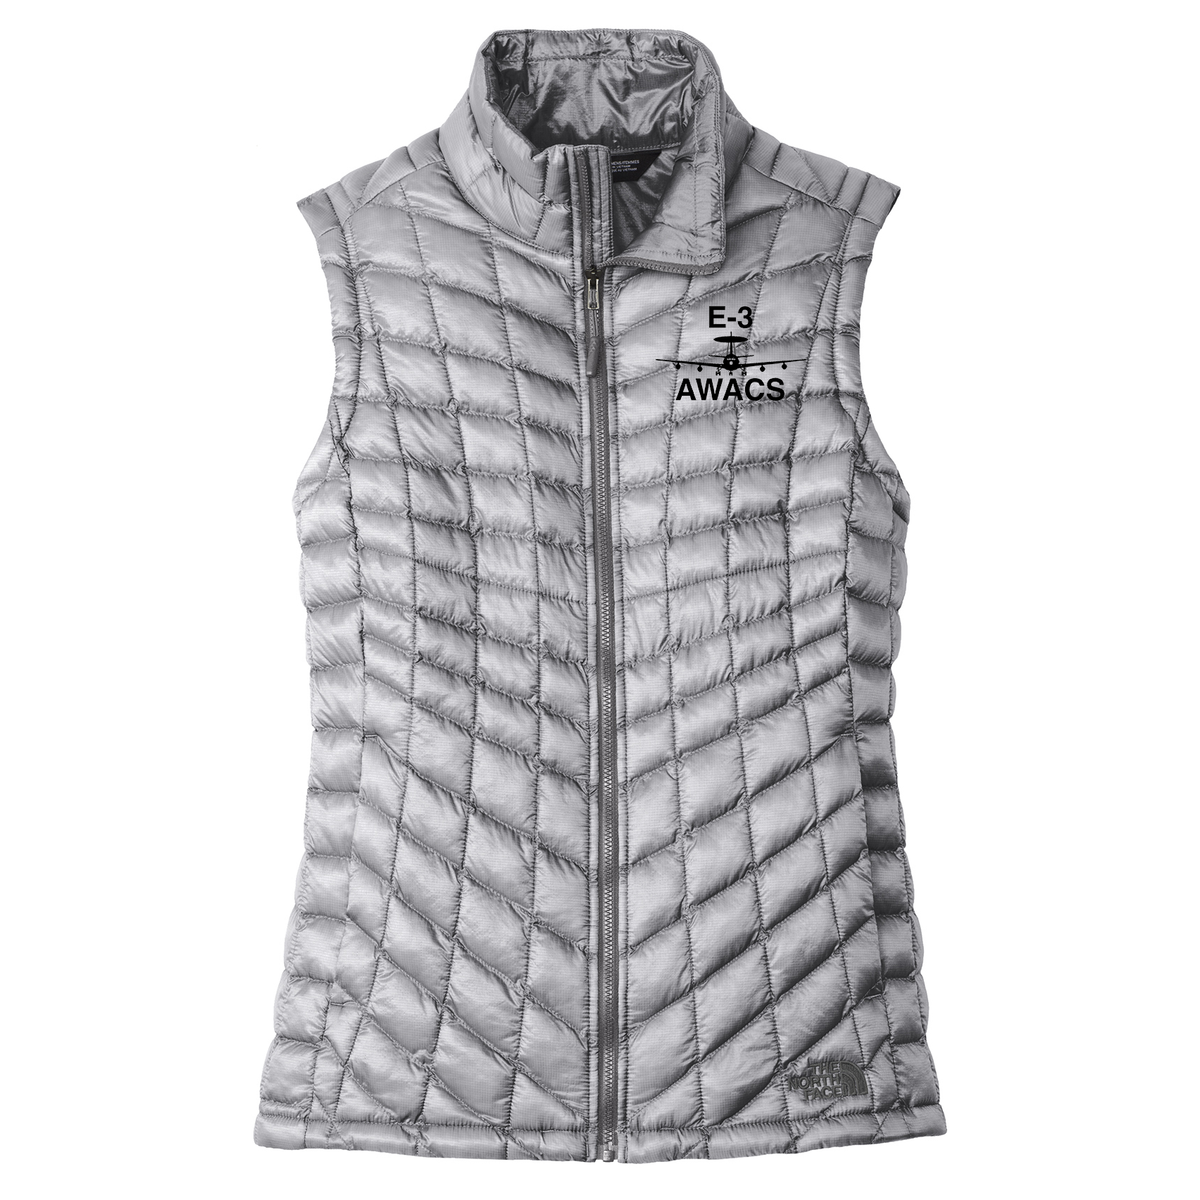 Boeing AWACS E-3 The North Face Ladies Thermoball Vest